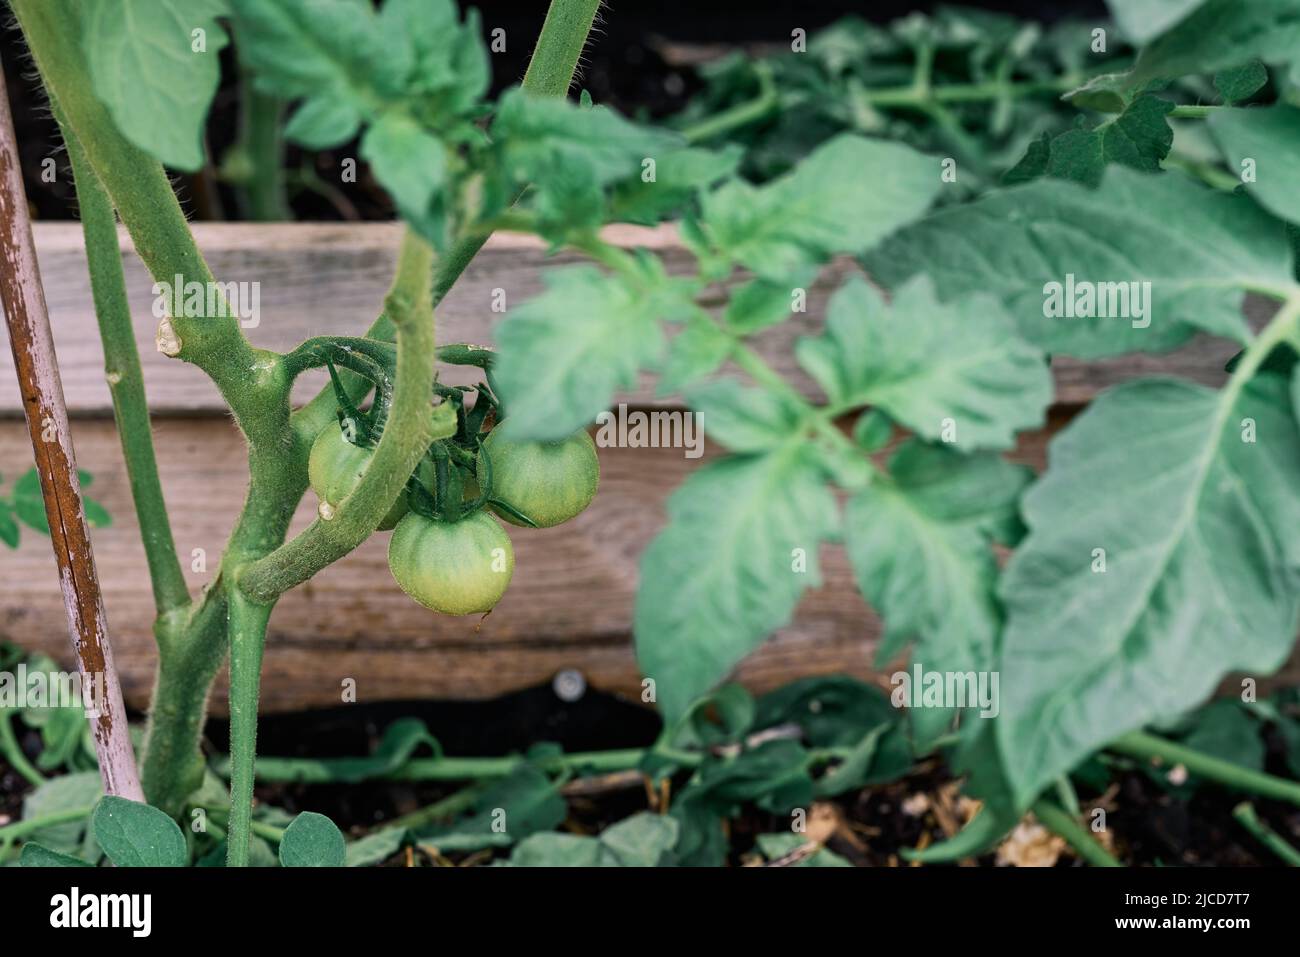 Small tomatoes growing in the pot of an urban garden Stock Photo